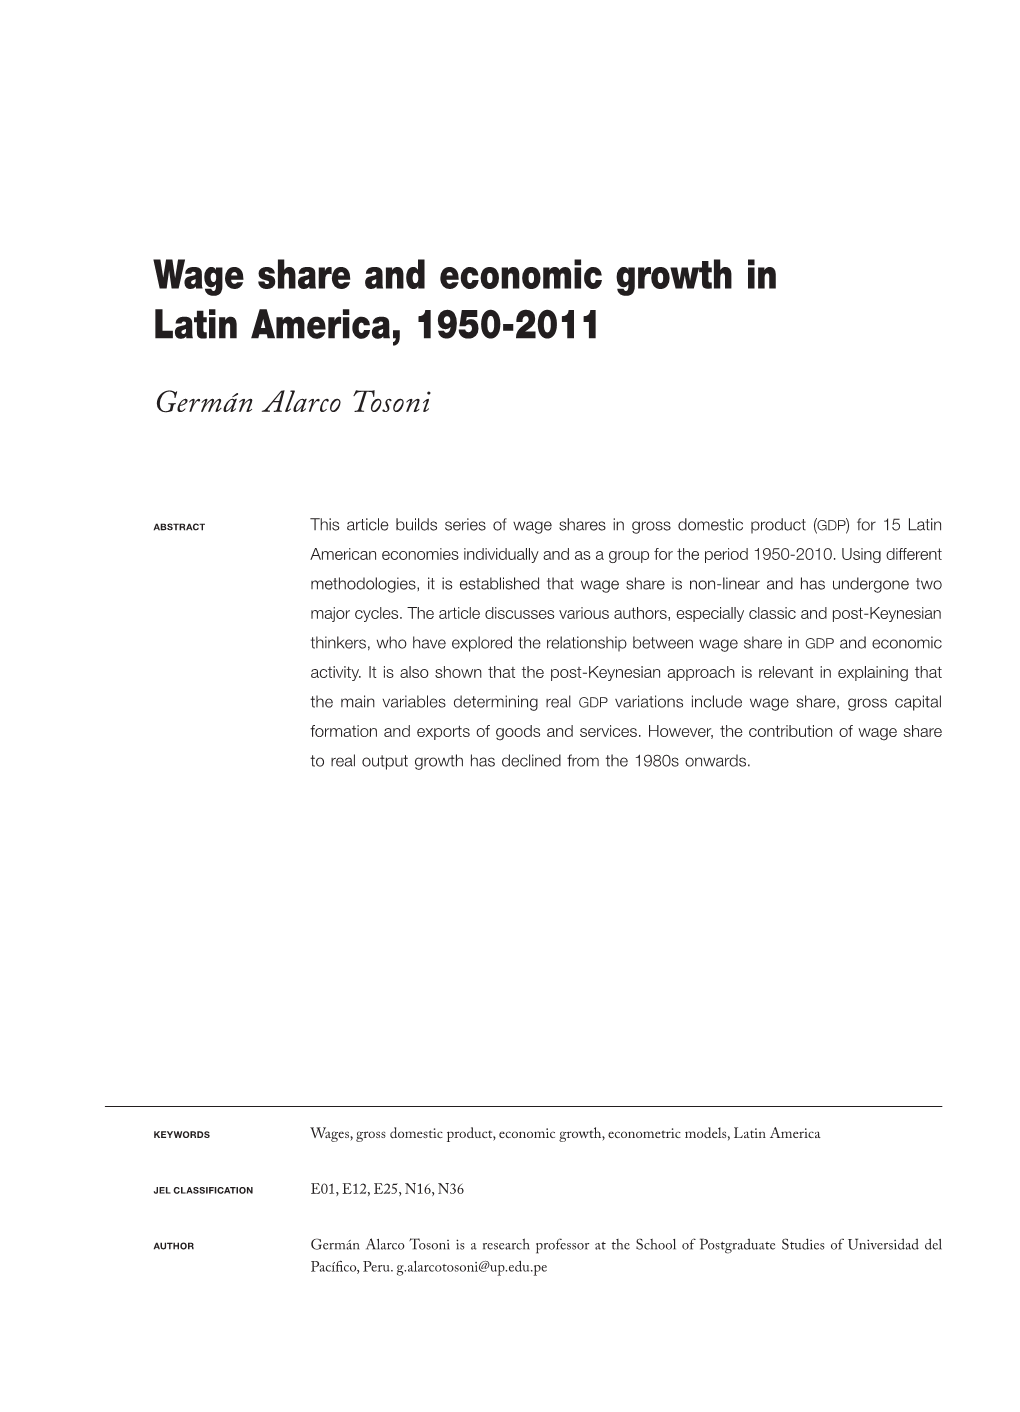 Wage Share and Economic Growth in Latin America, 1950-2011